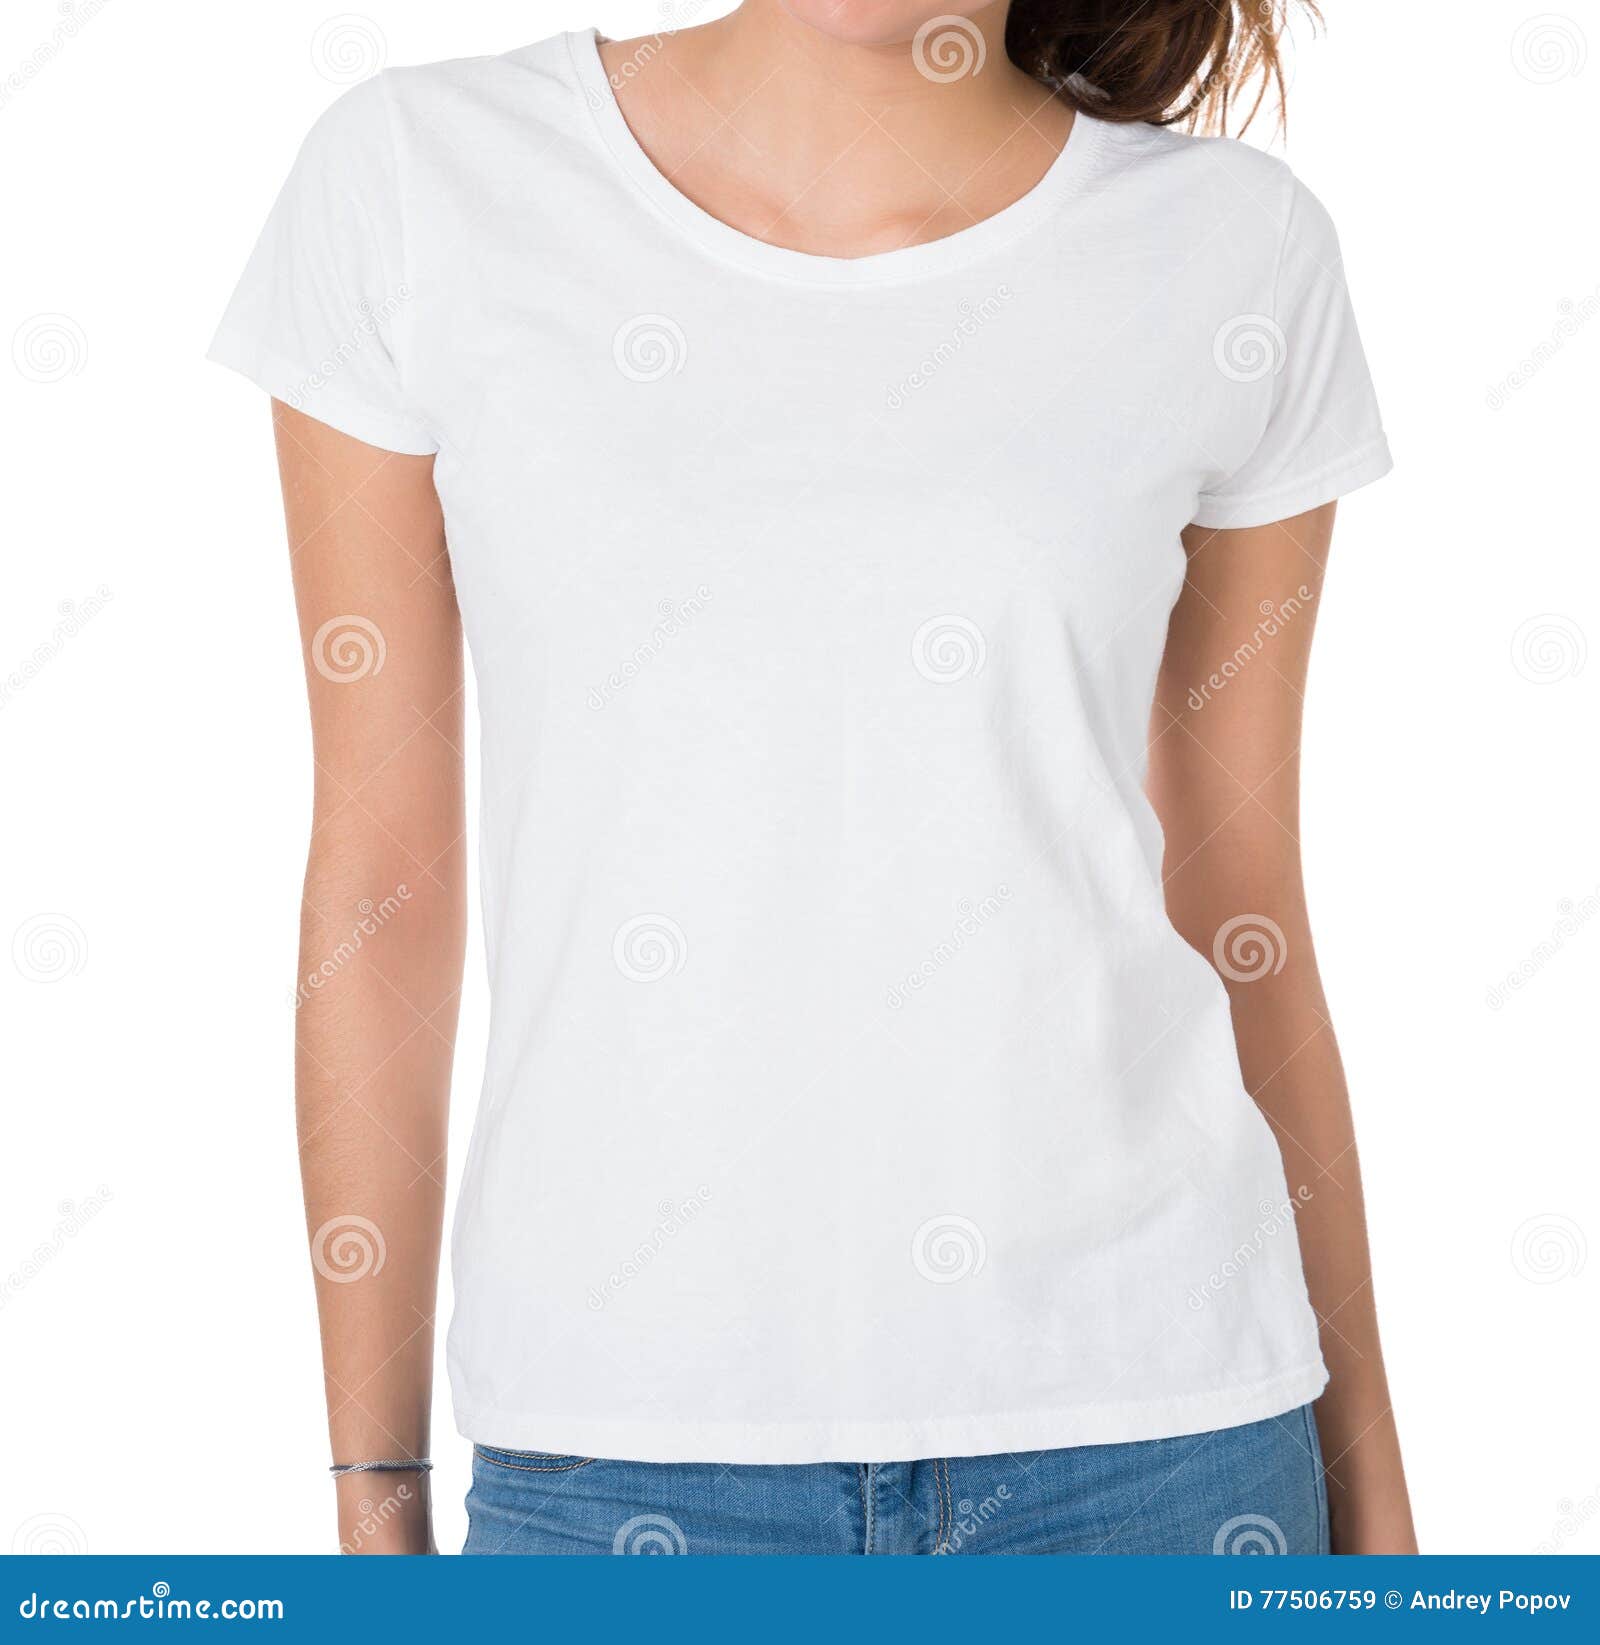 midsection of woman wearing blank white tshirt